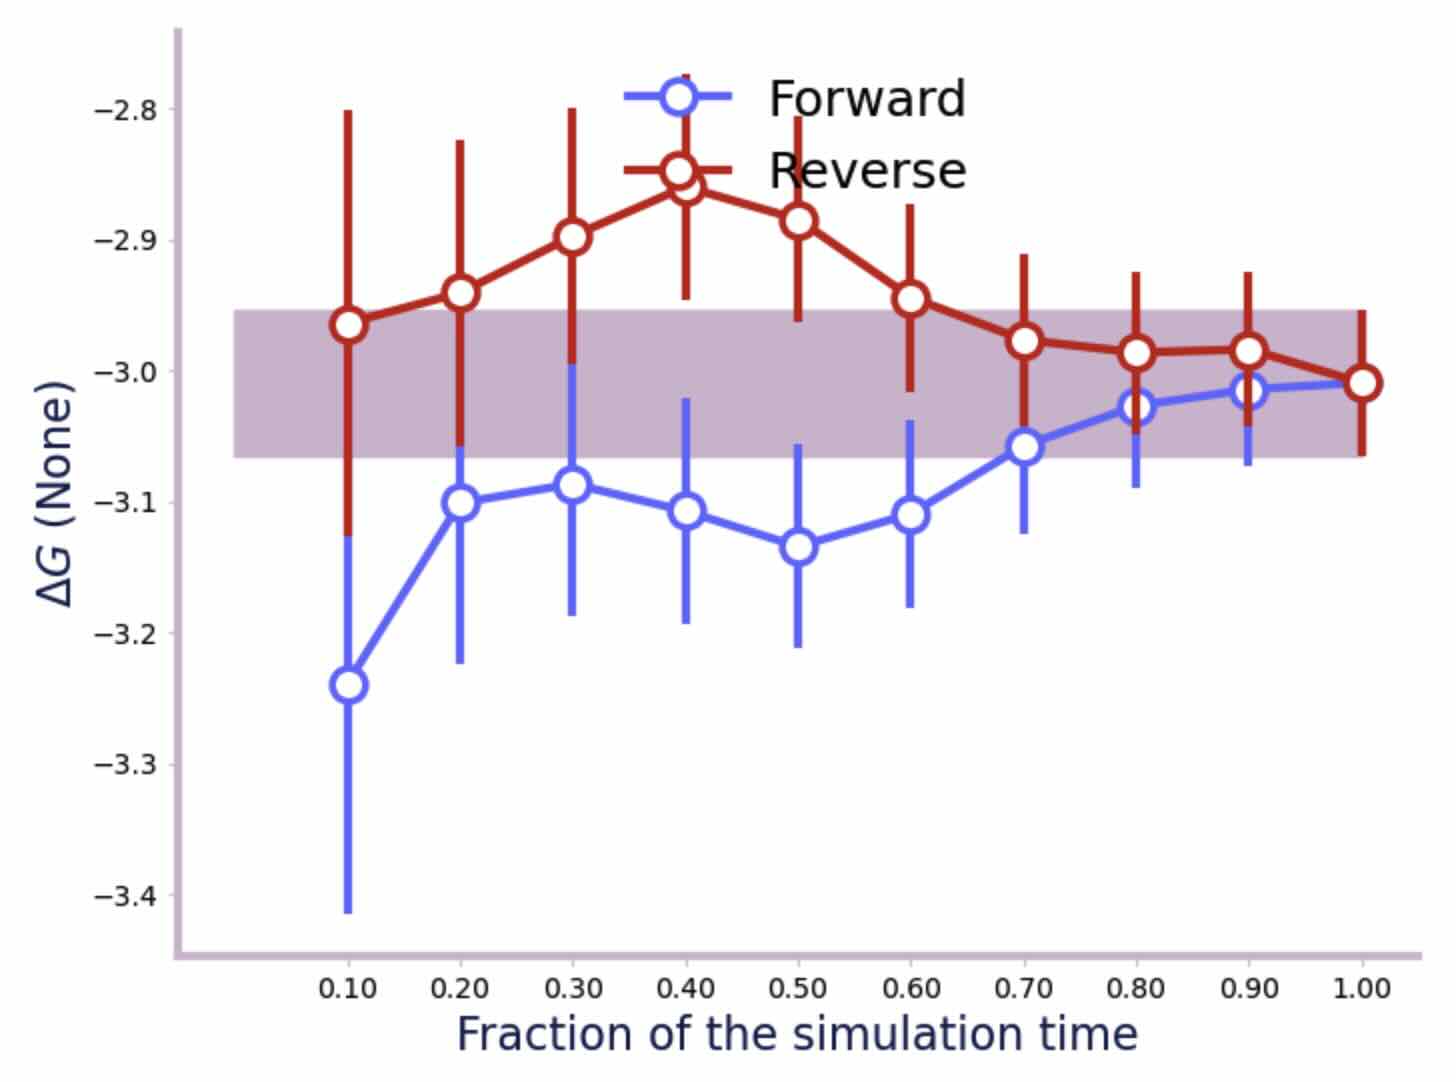 Convergence of the free energy estimate as a function of the fraction of simulation length